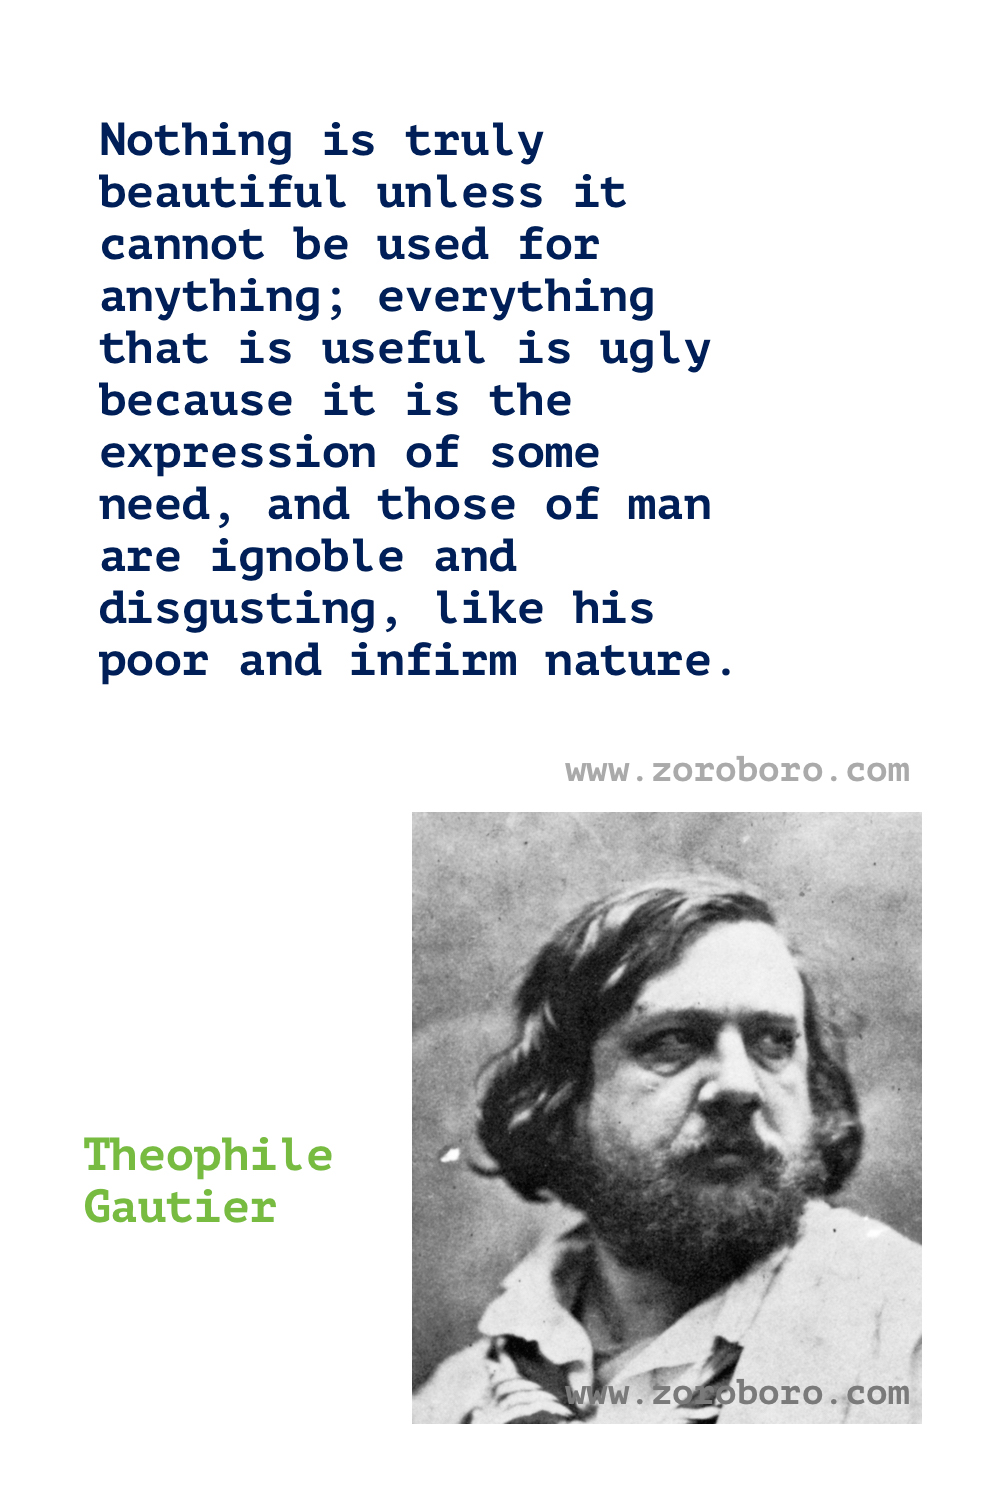 Theophile Gautier Quotes, Theophile Gautier Poems, Theophile Gautier Poetry, Theophile Gautier Books Quotes, Poésie, Theophile Gautier .